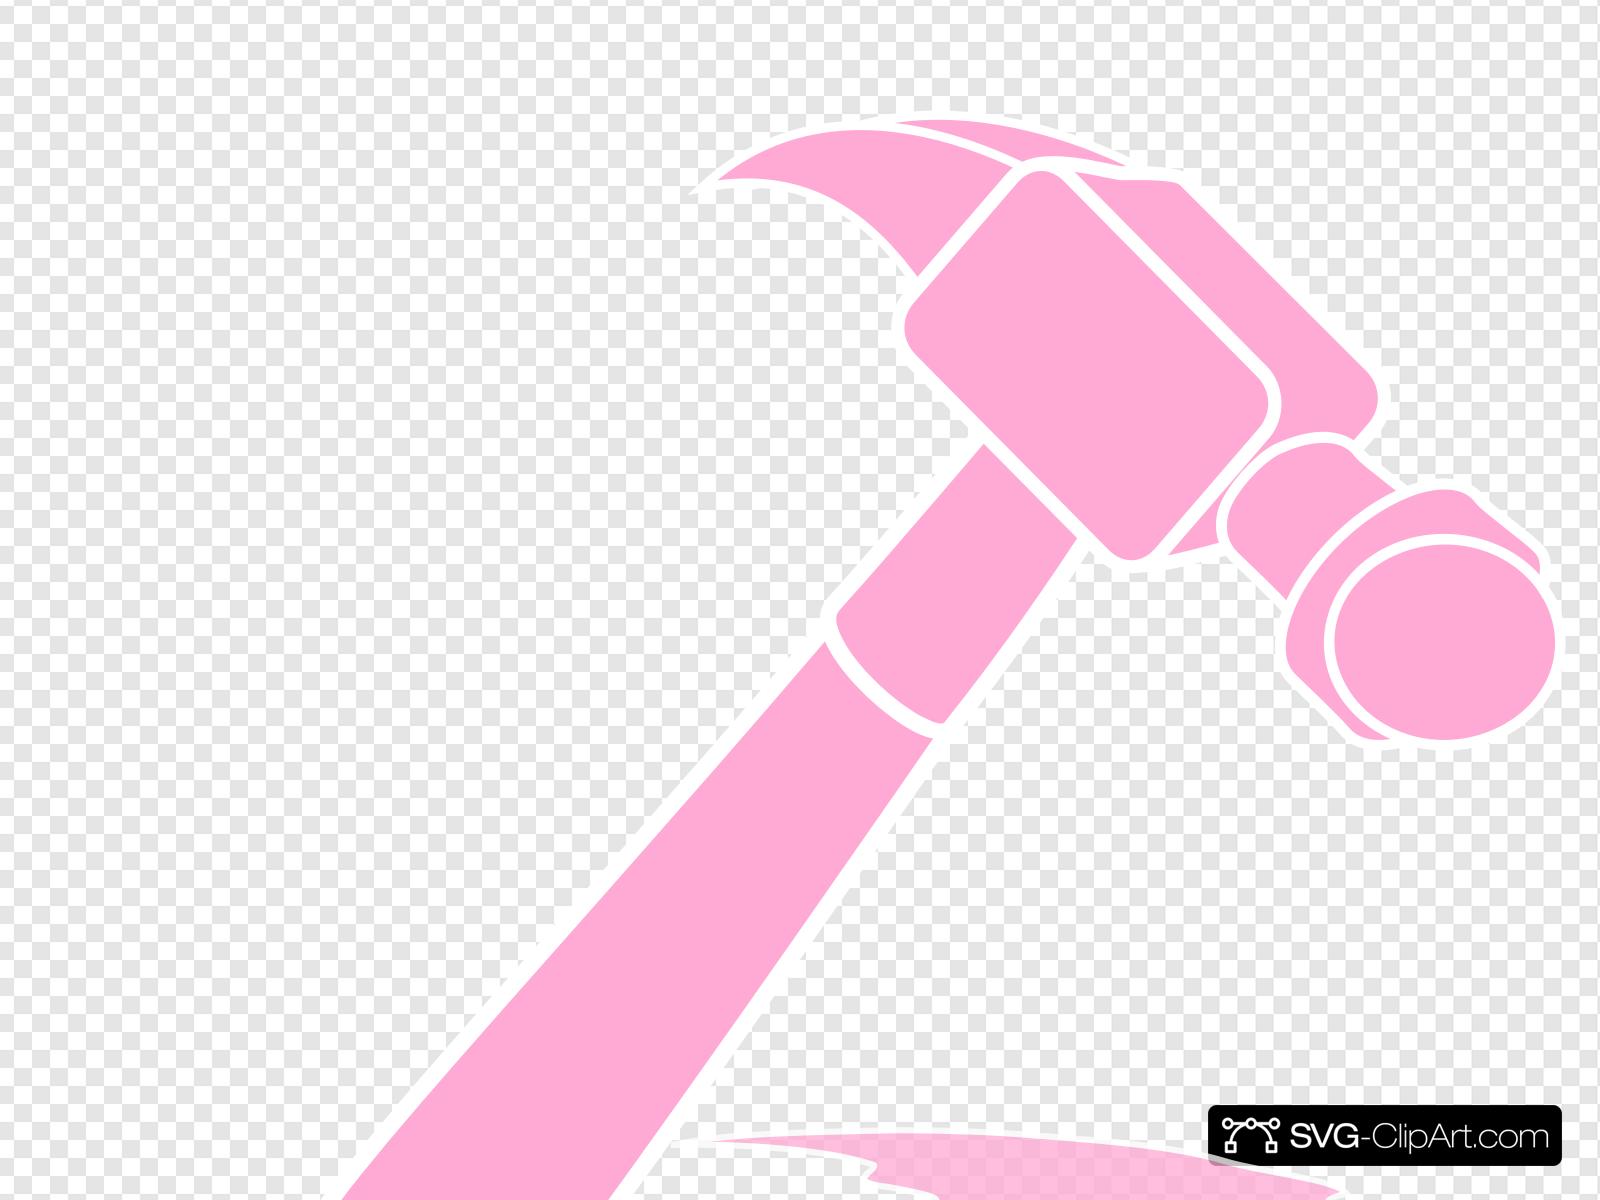 Charming clip art icon. Hammer clipart pink